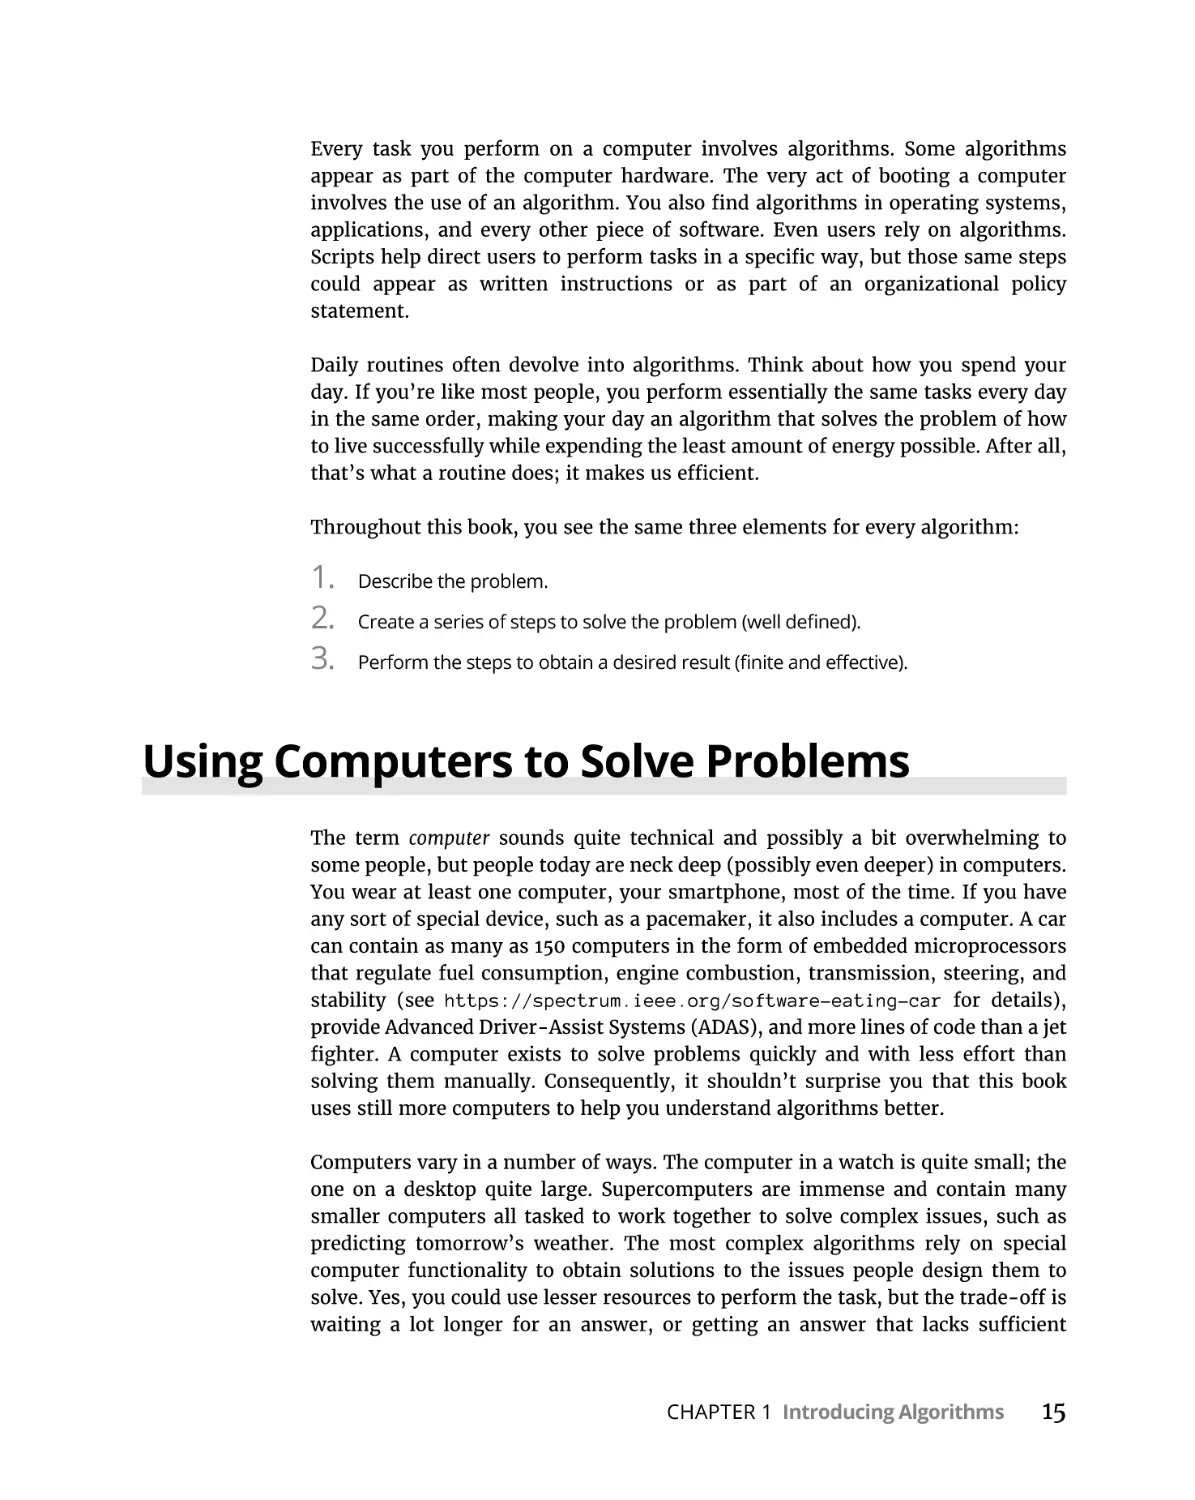 Using Computers to Solve Problems